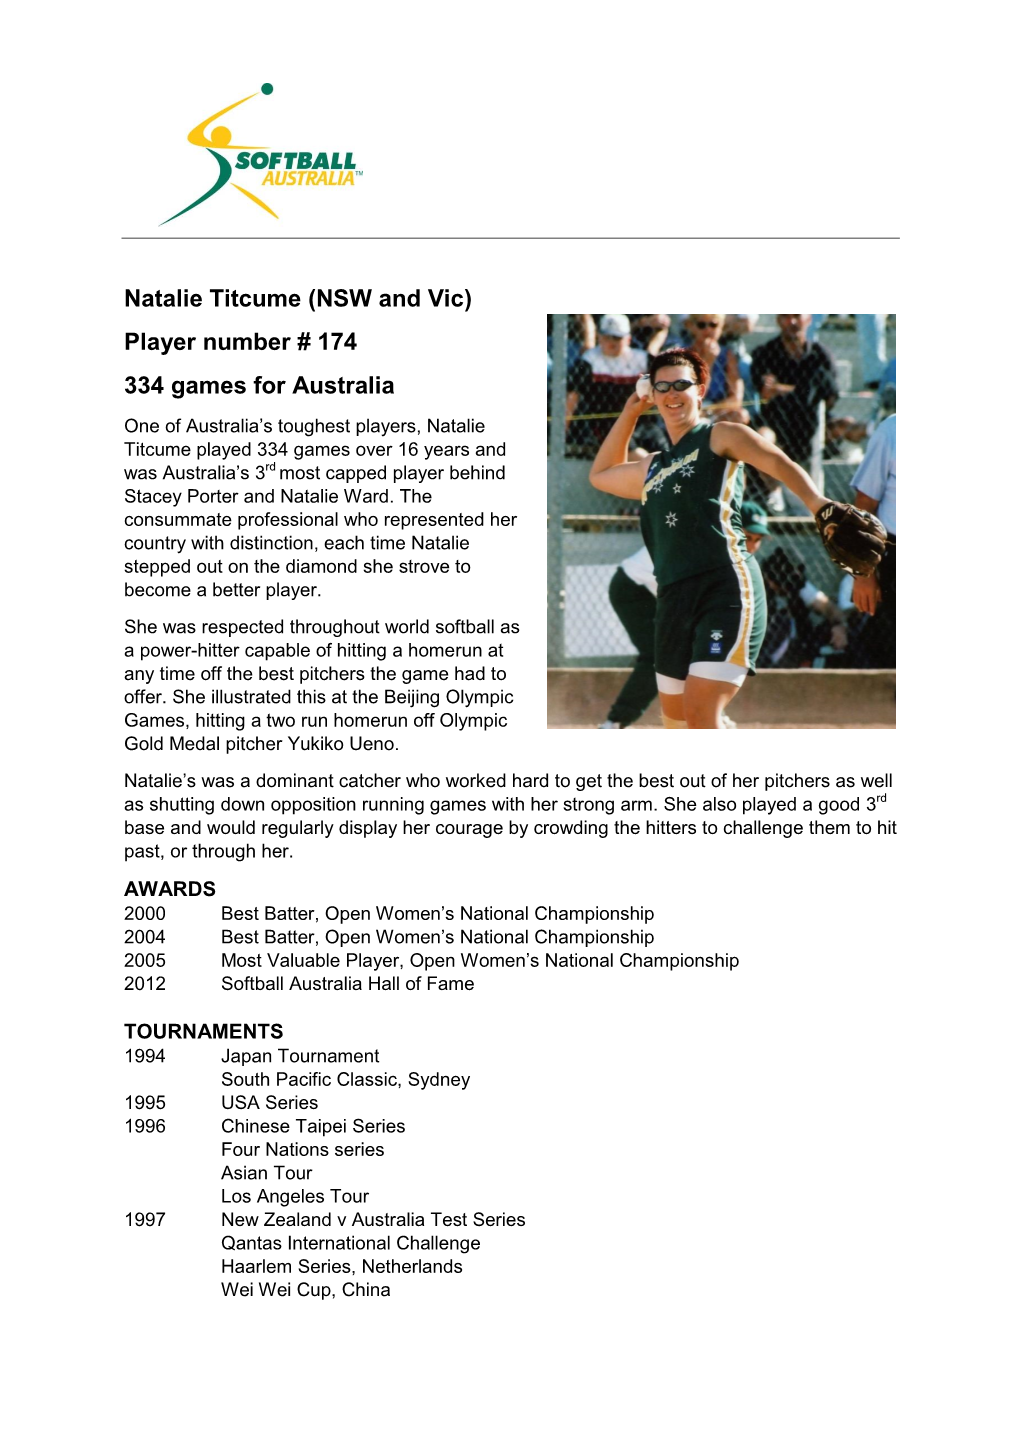 Natalie Titcume (NSW and Vic) Player Number # 174 334 Games for Australia